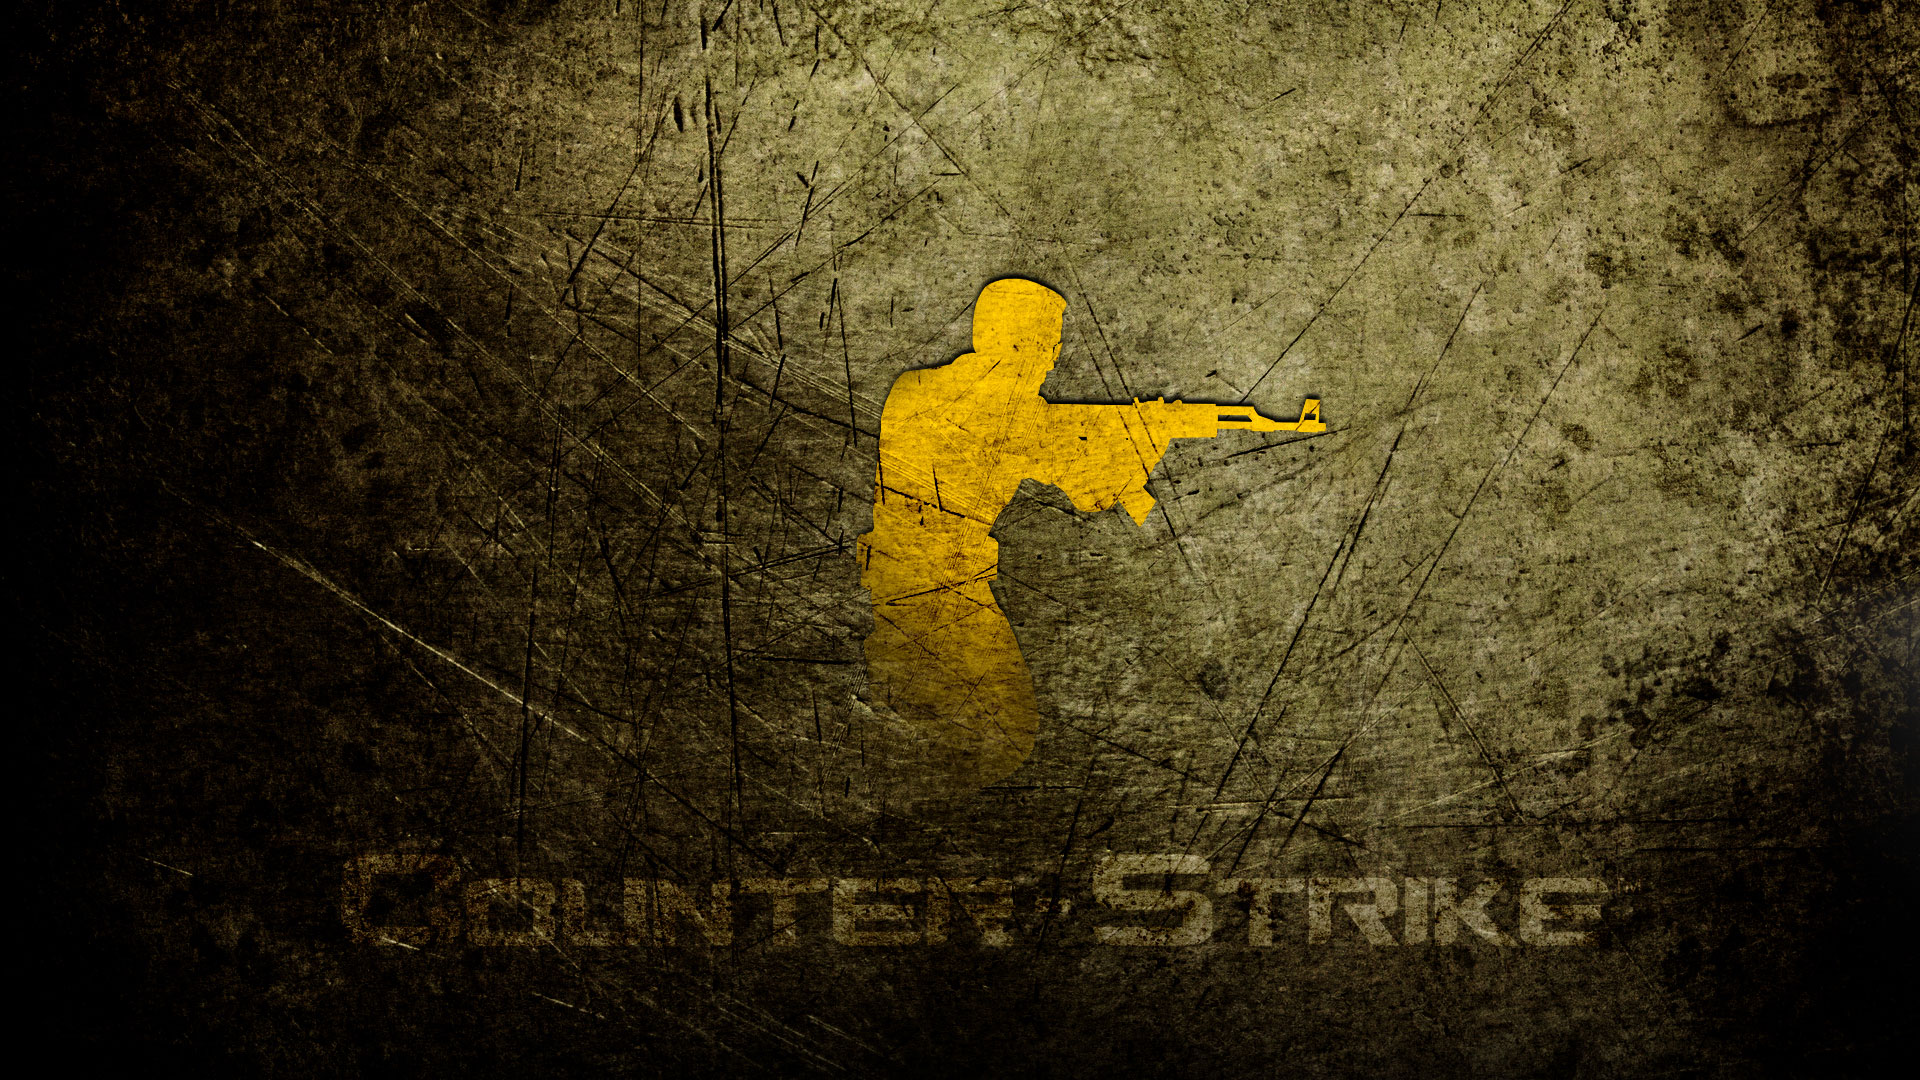 Counter-strike Hd Wallpapers - Background Counter Strike  - 1920x1080  Wallpaper 